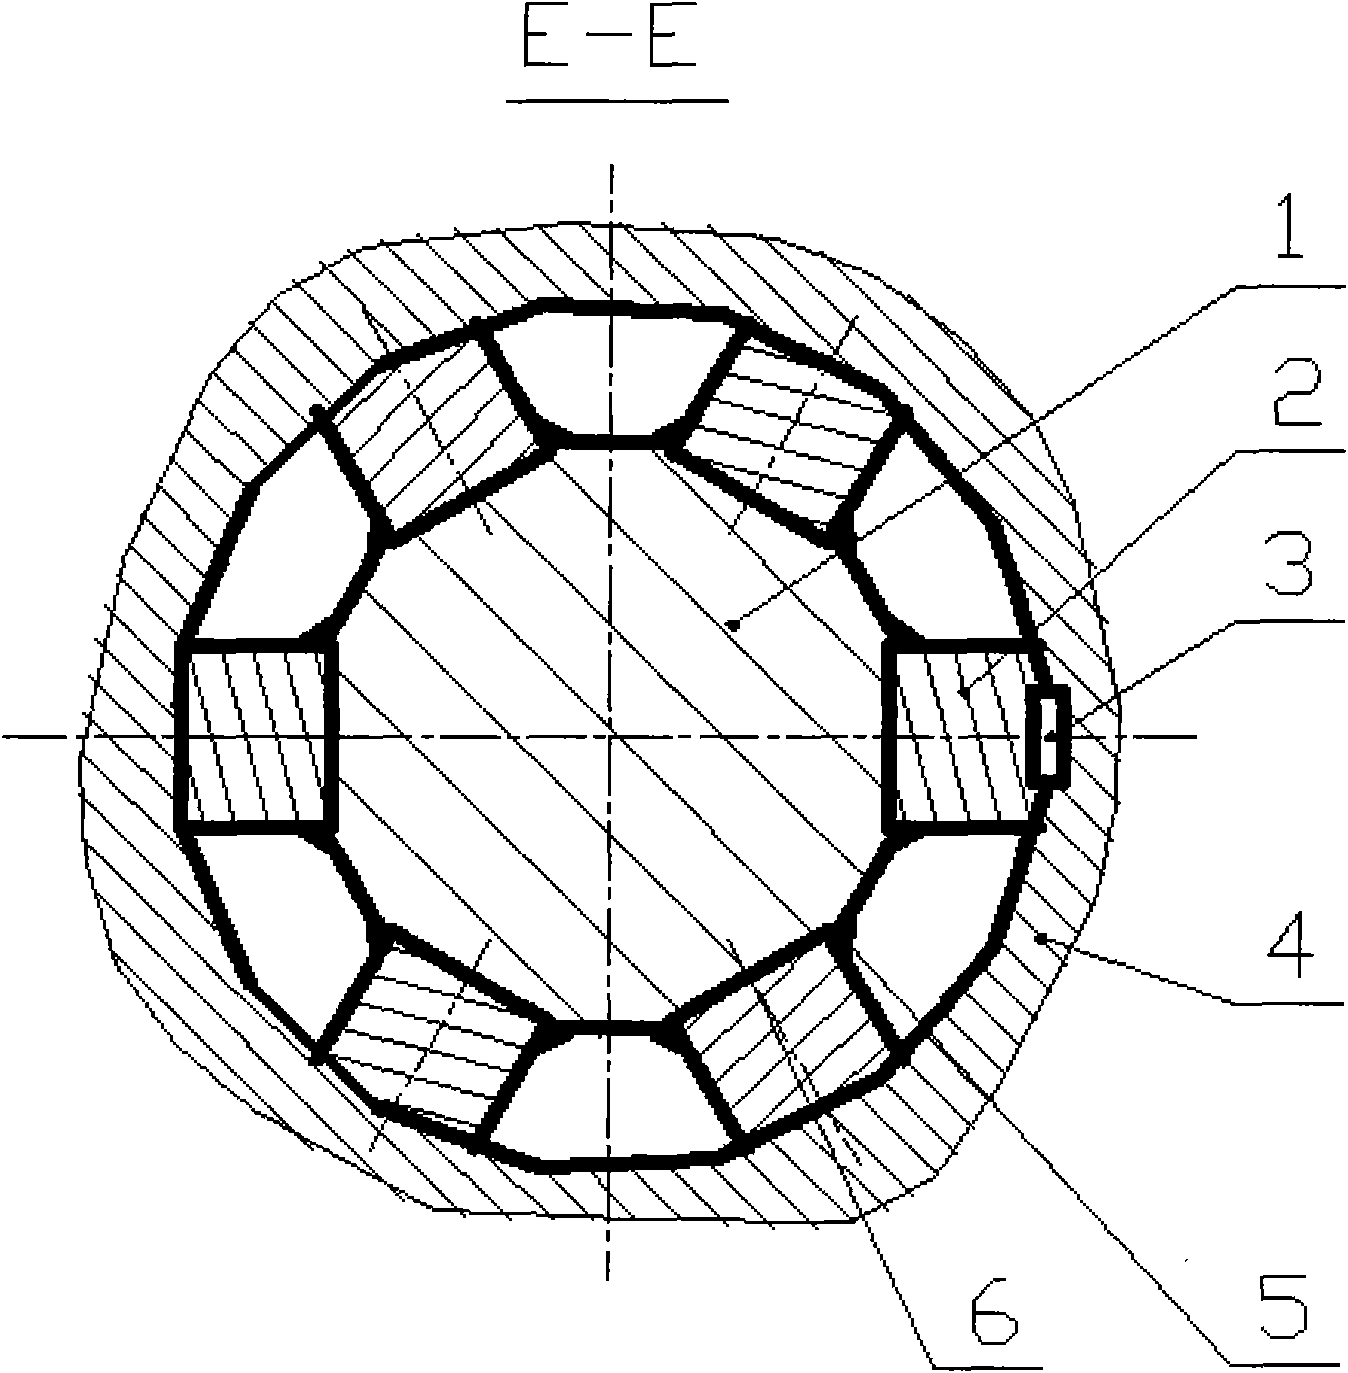 Radial axis structure of motor and welding process